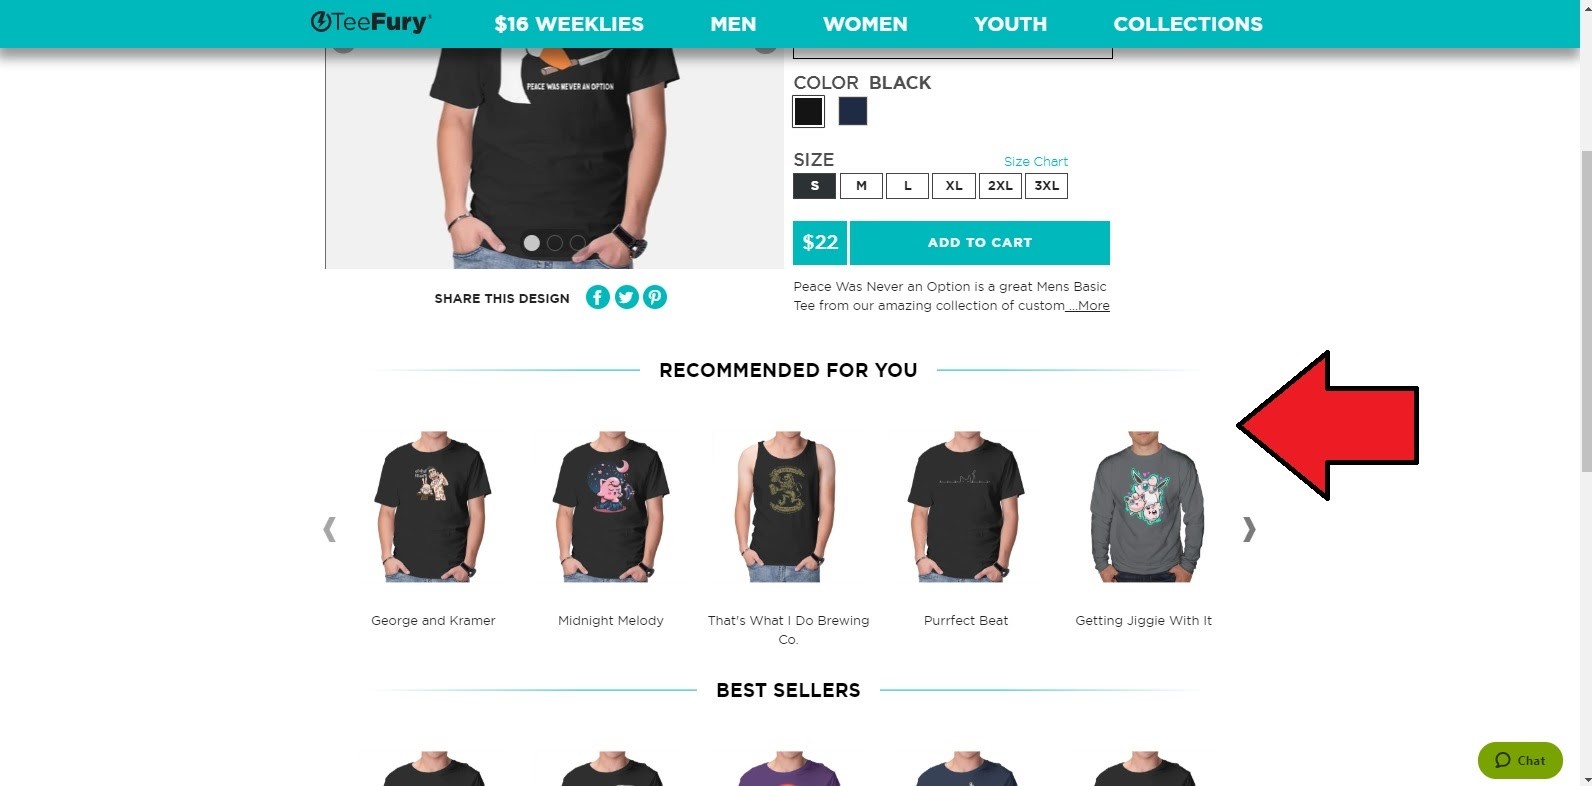 TeeSpring recommended shirts